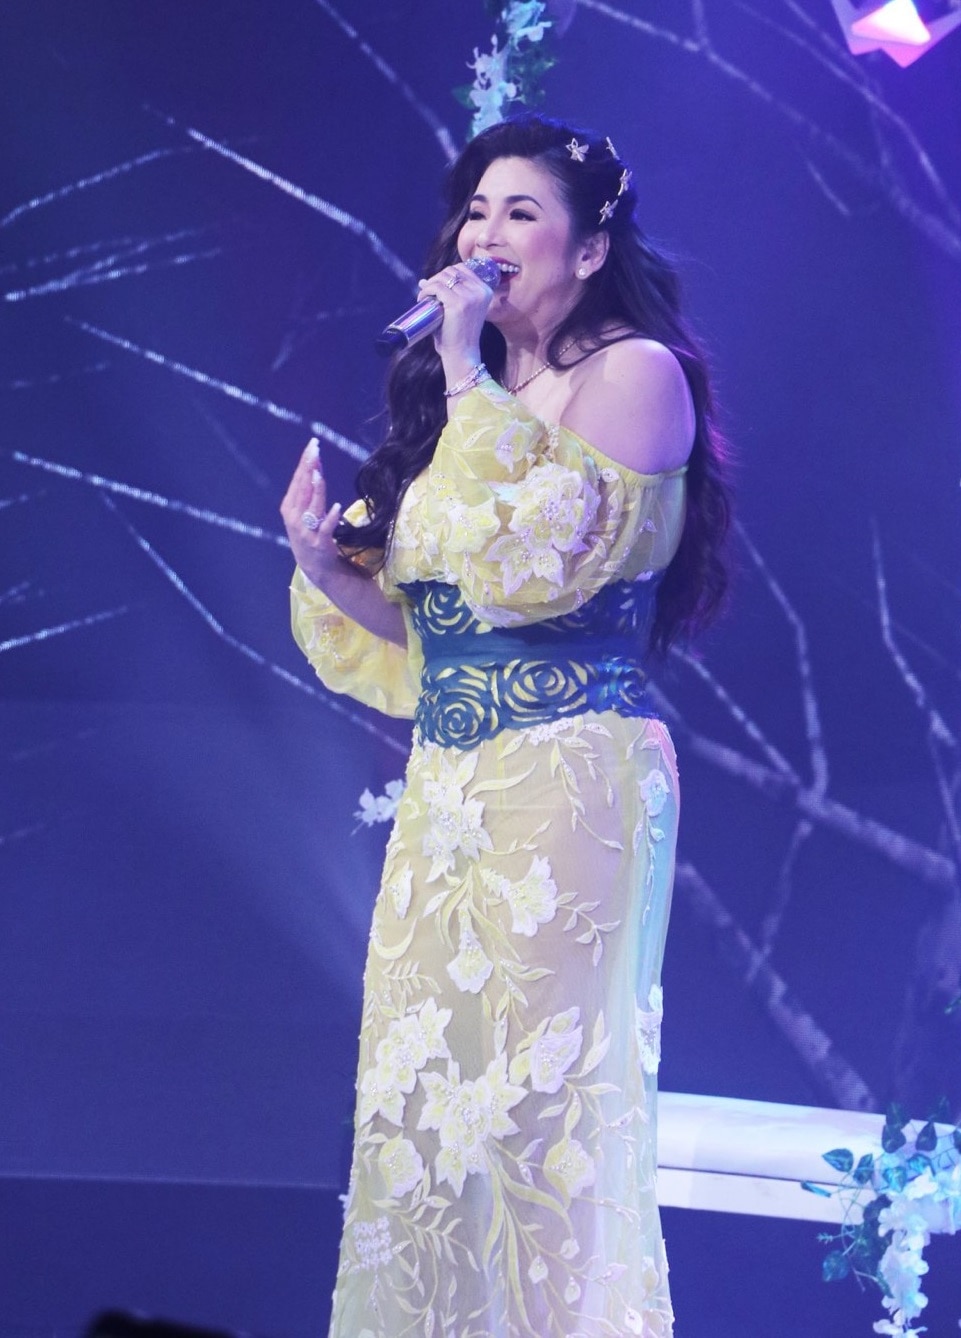 Regine's "Freedom" concert surprised concertviewers with stunning